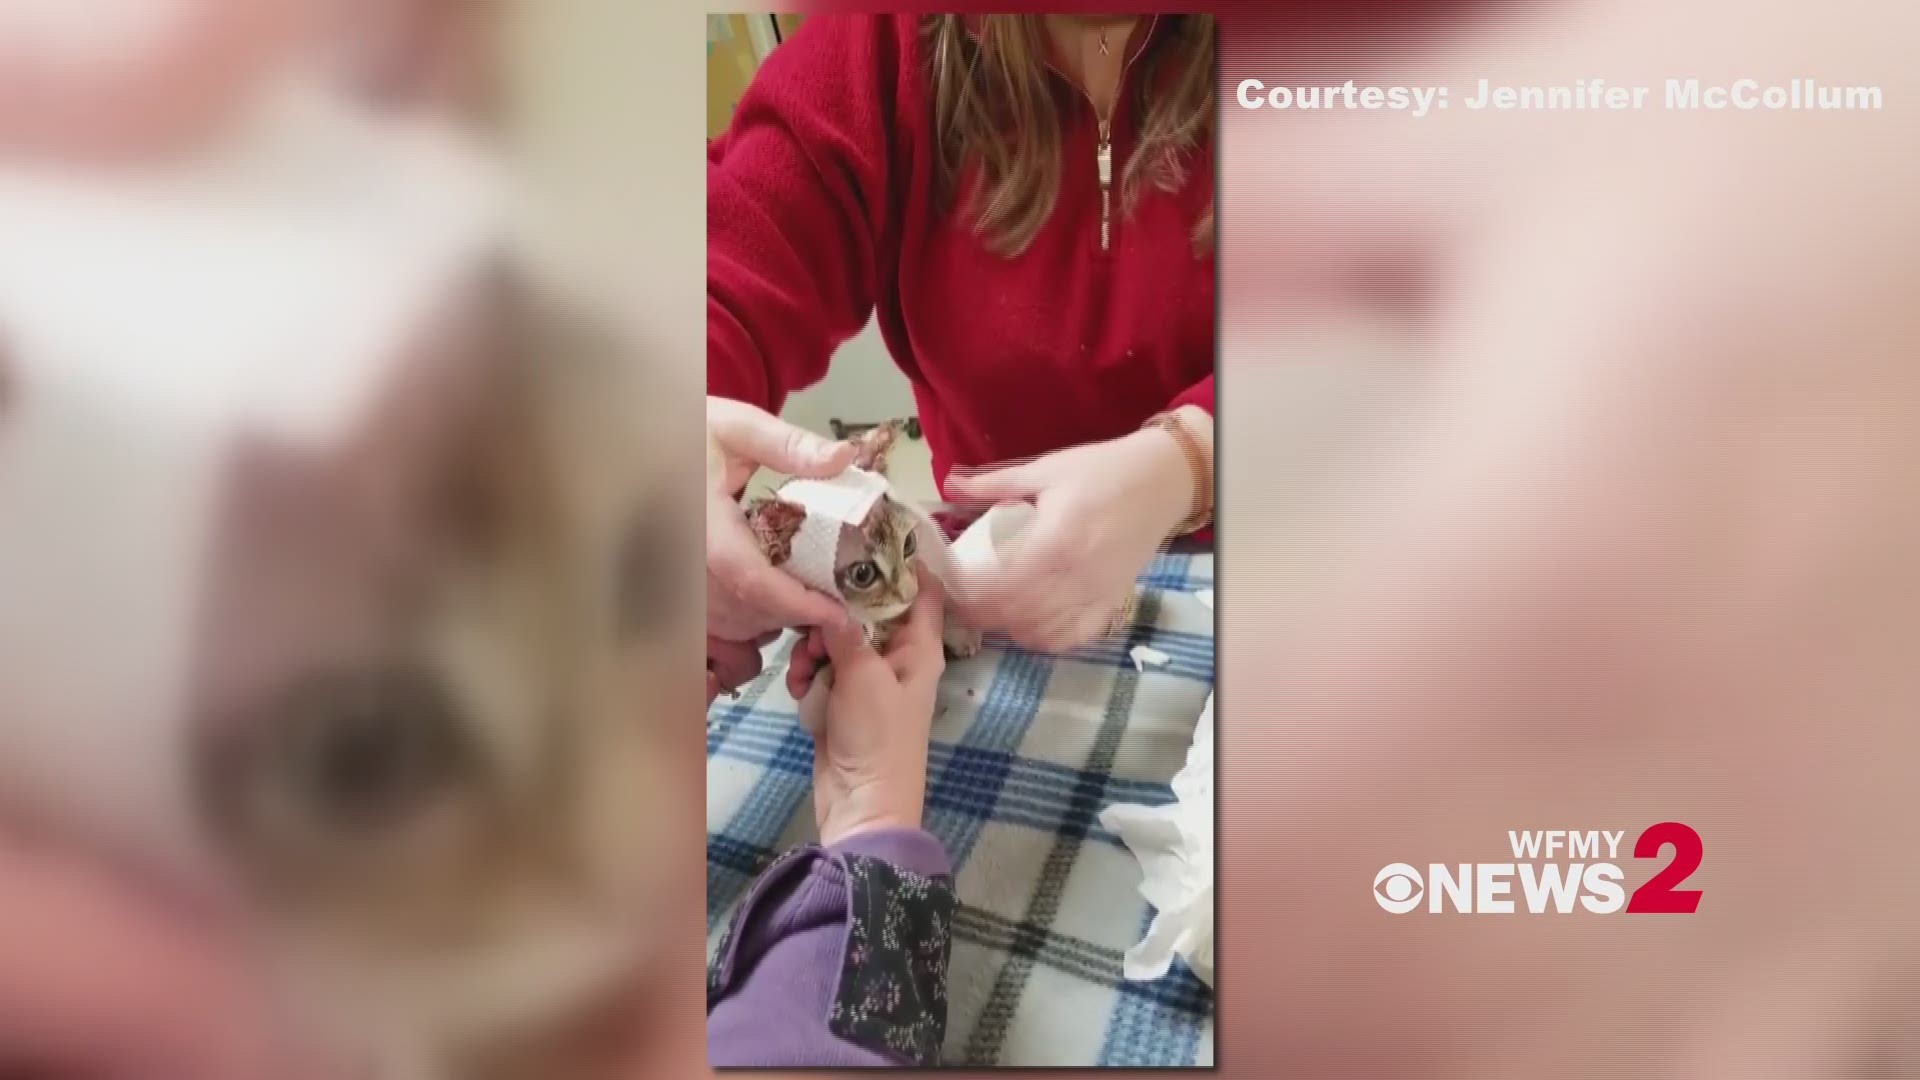 Shochu the kitten is recovering from severe chemical burns covering a third of his body.